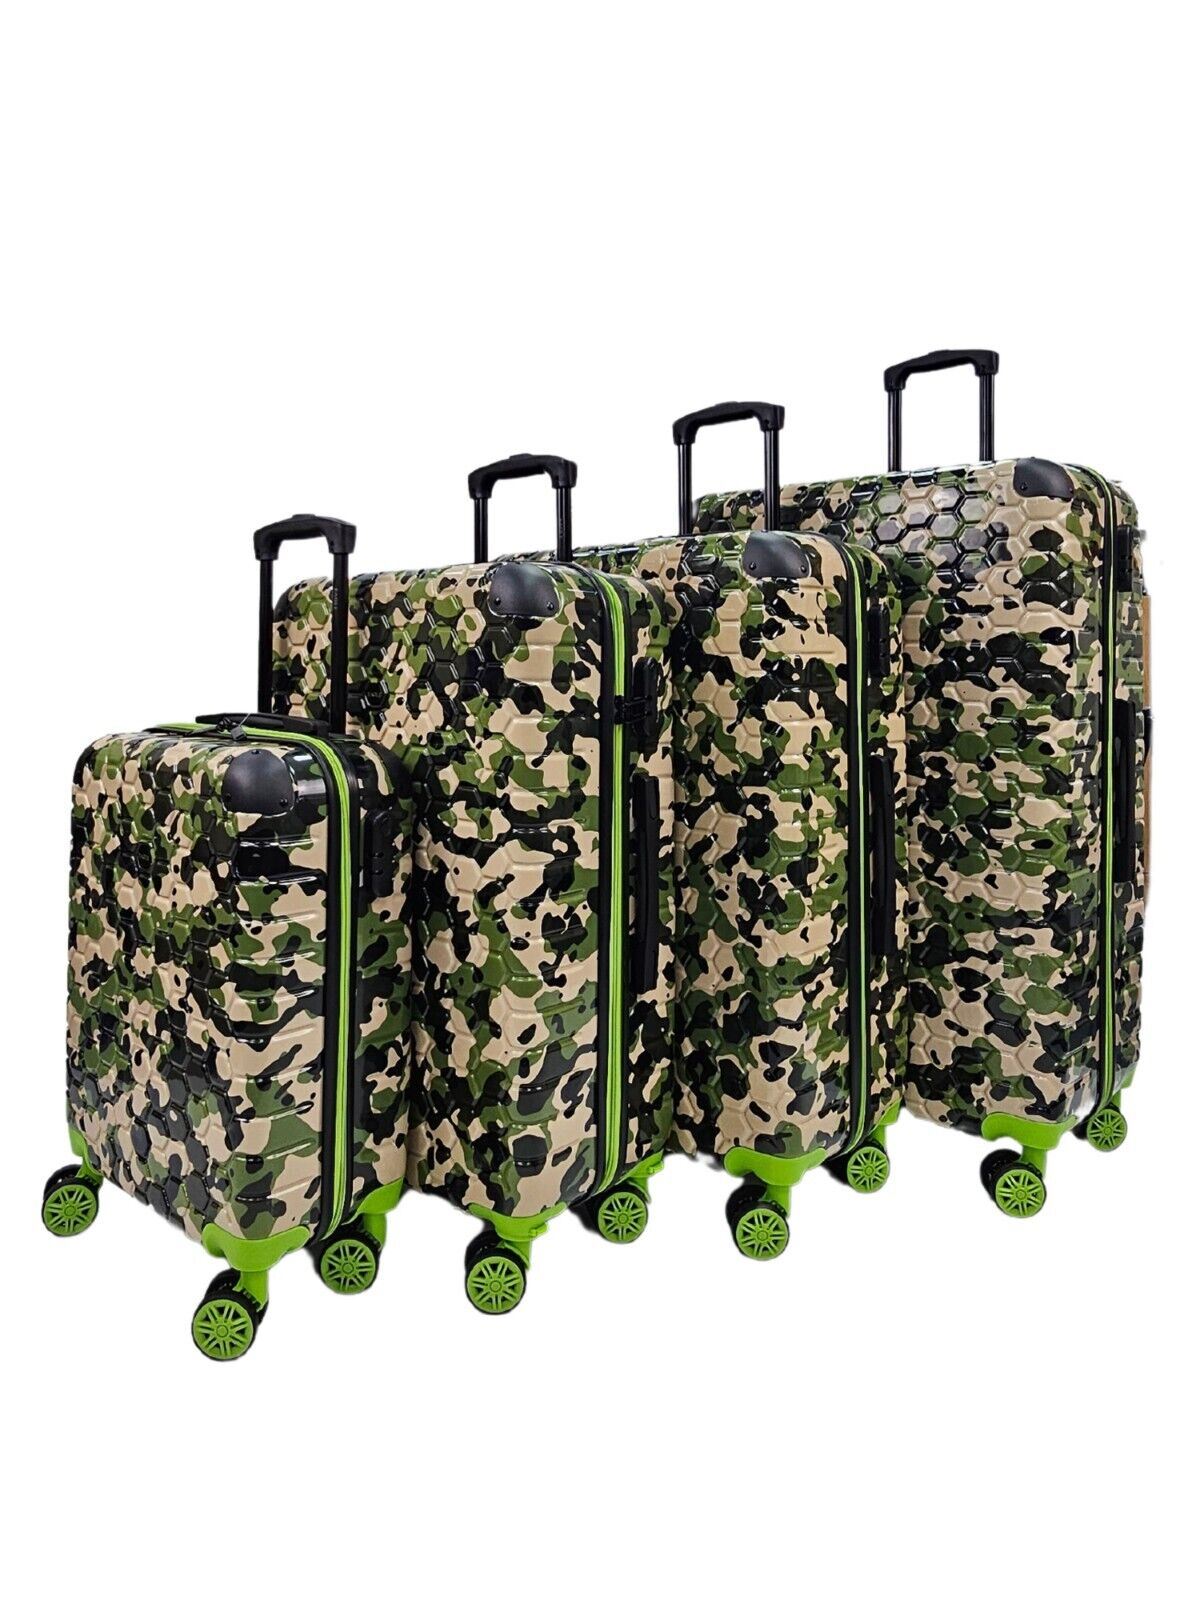 Brantley Set of 4 Hard Shell Suitcase in Green